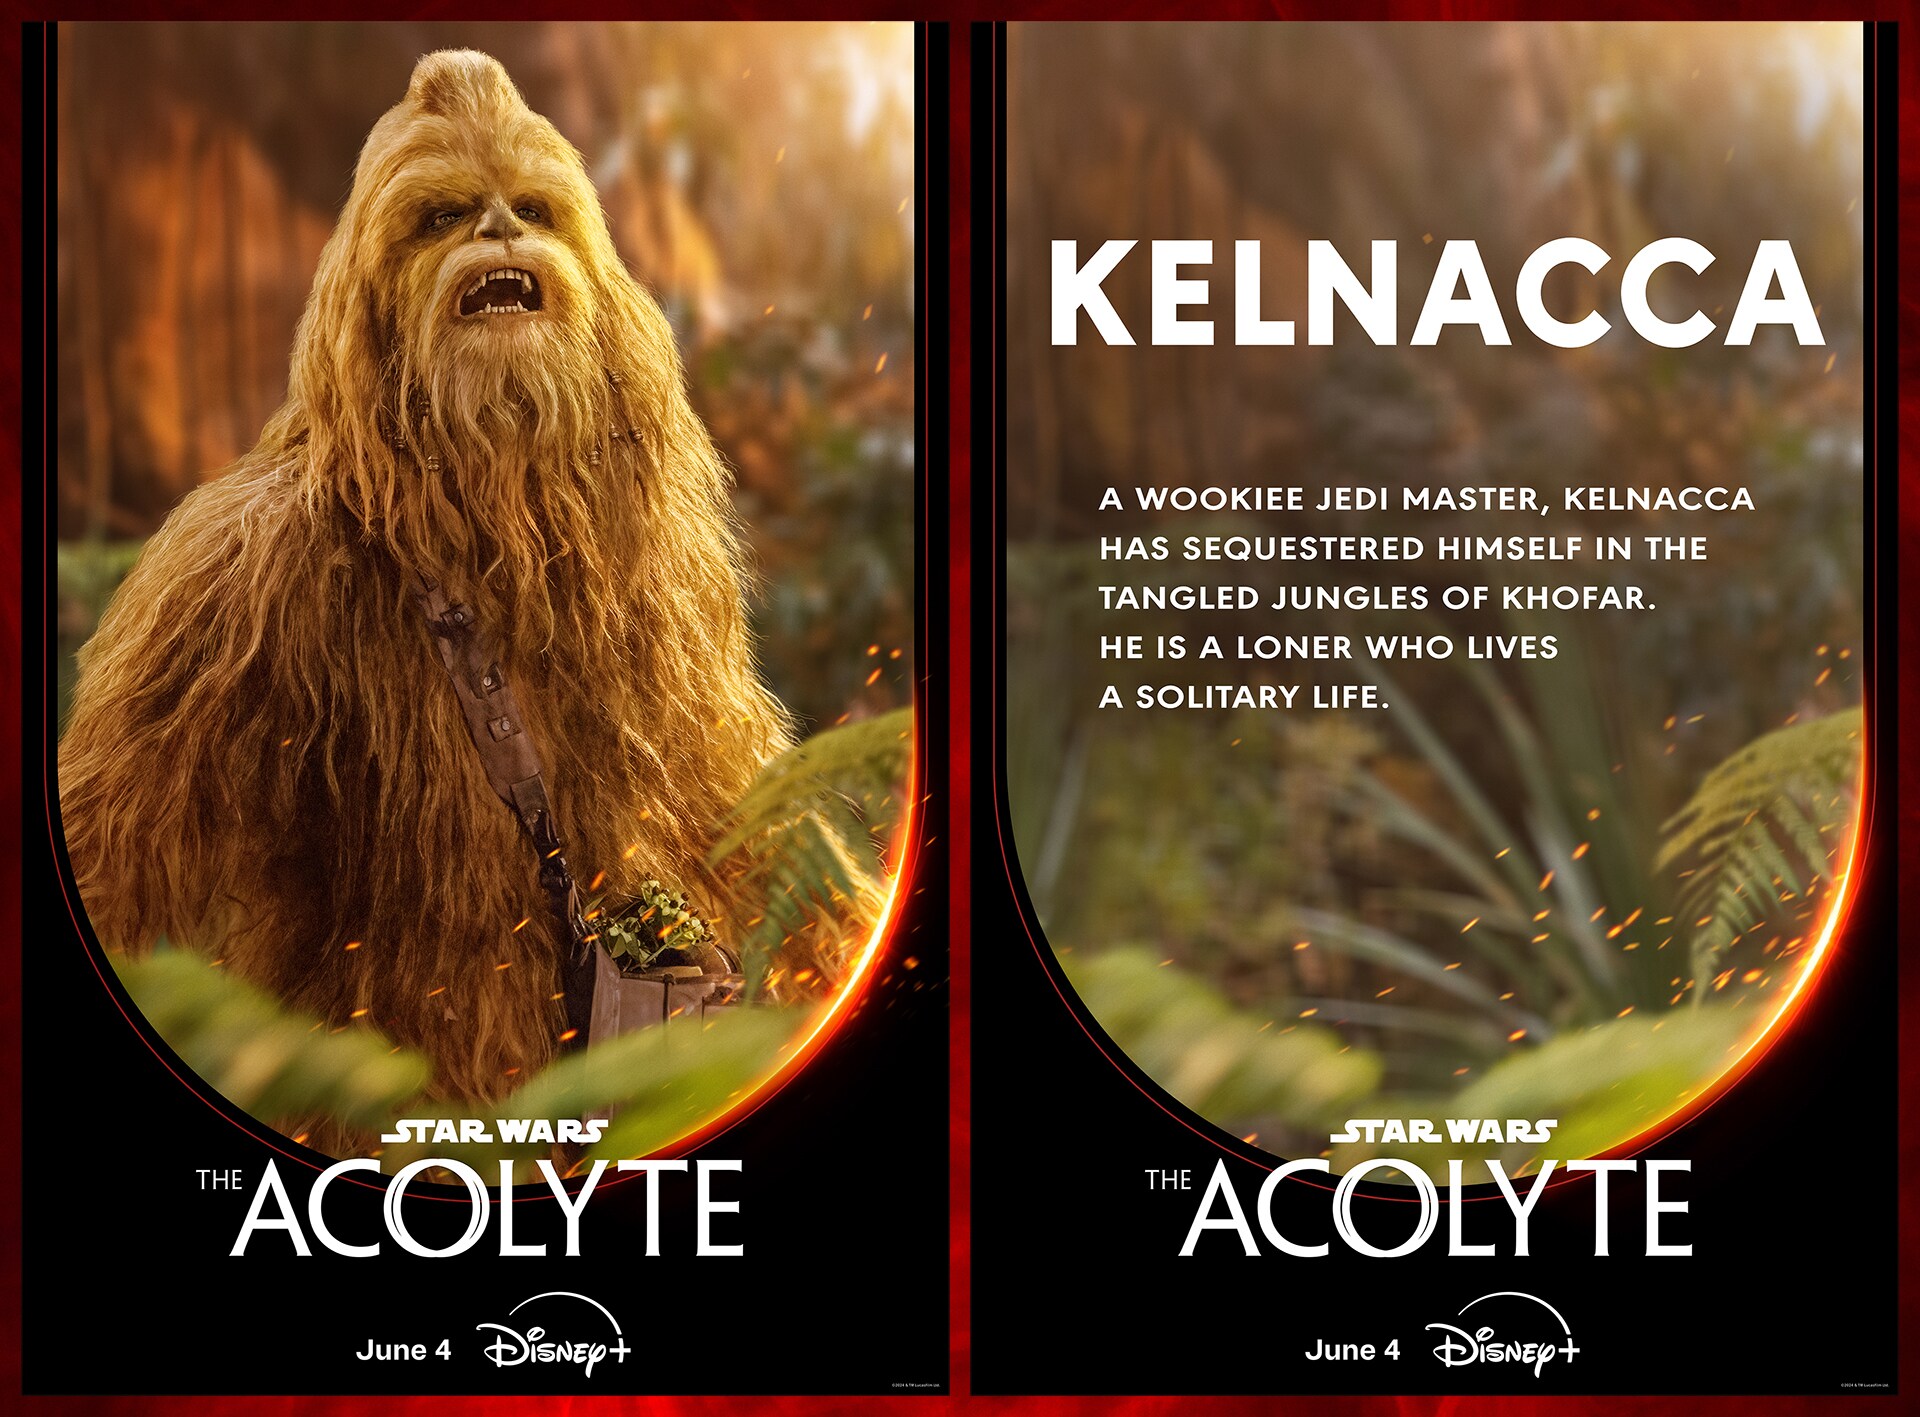 pdx-character-posters-kelnacca_34a738be.